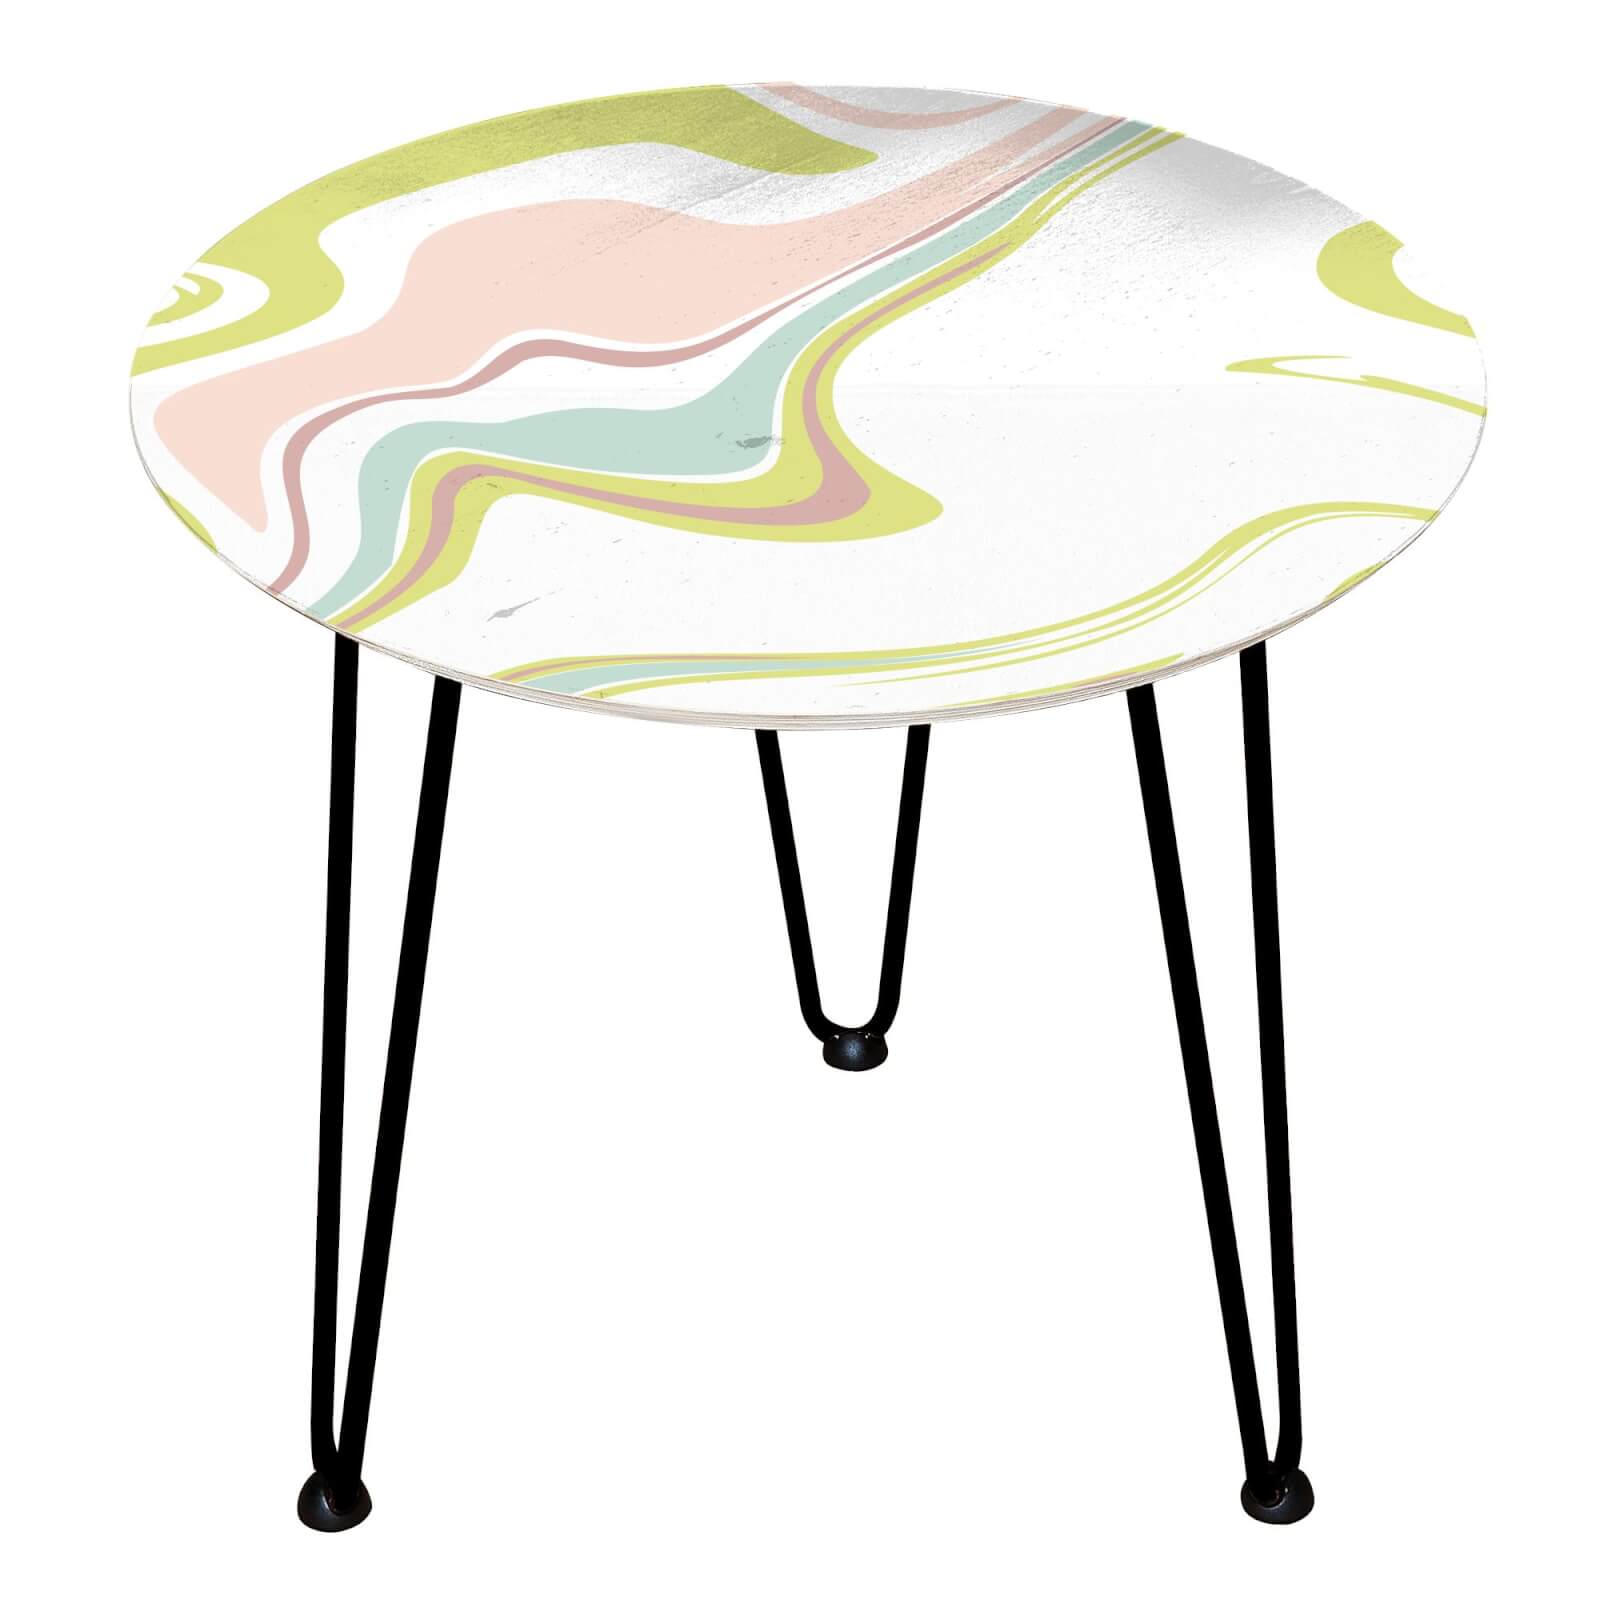 Decorsome - Pastel Waves Wooden Side Table - Black